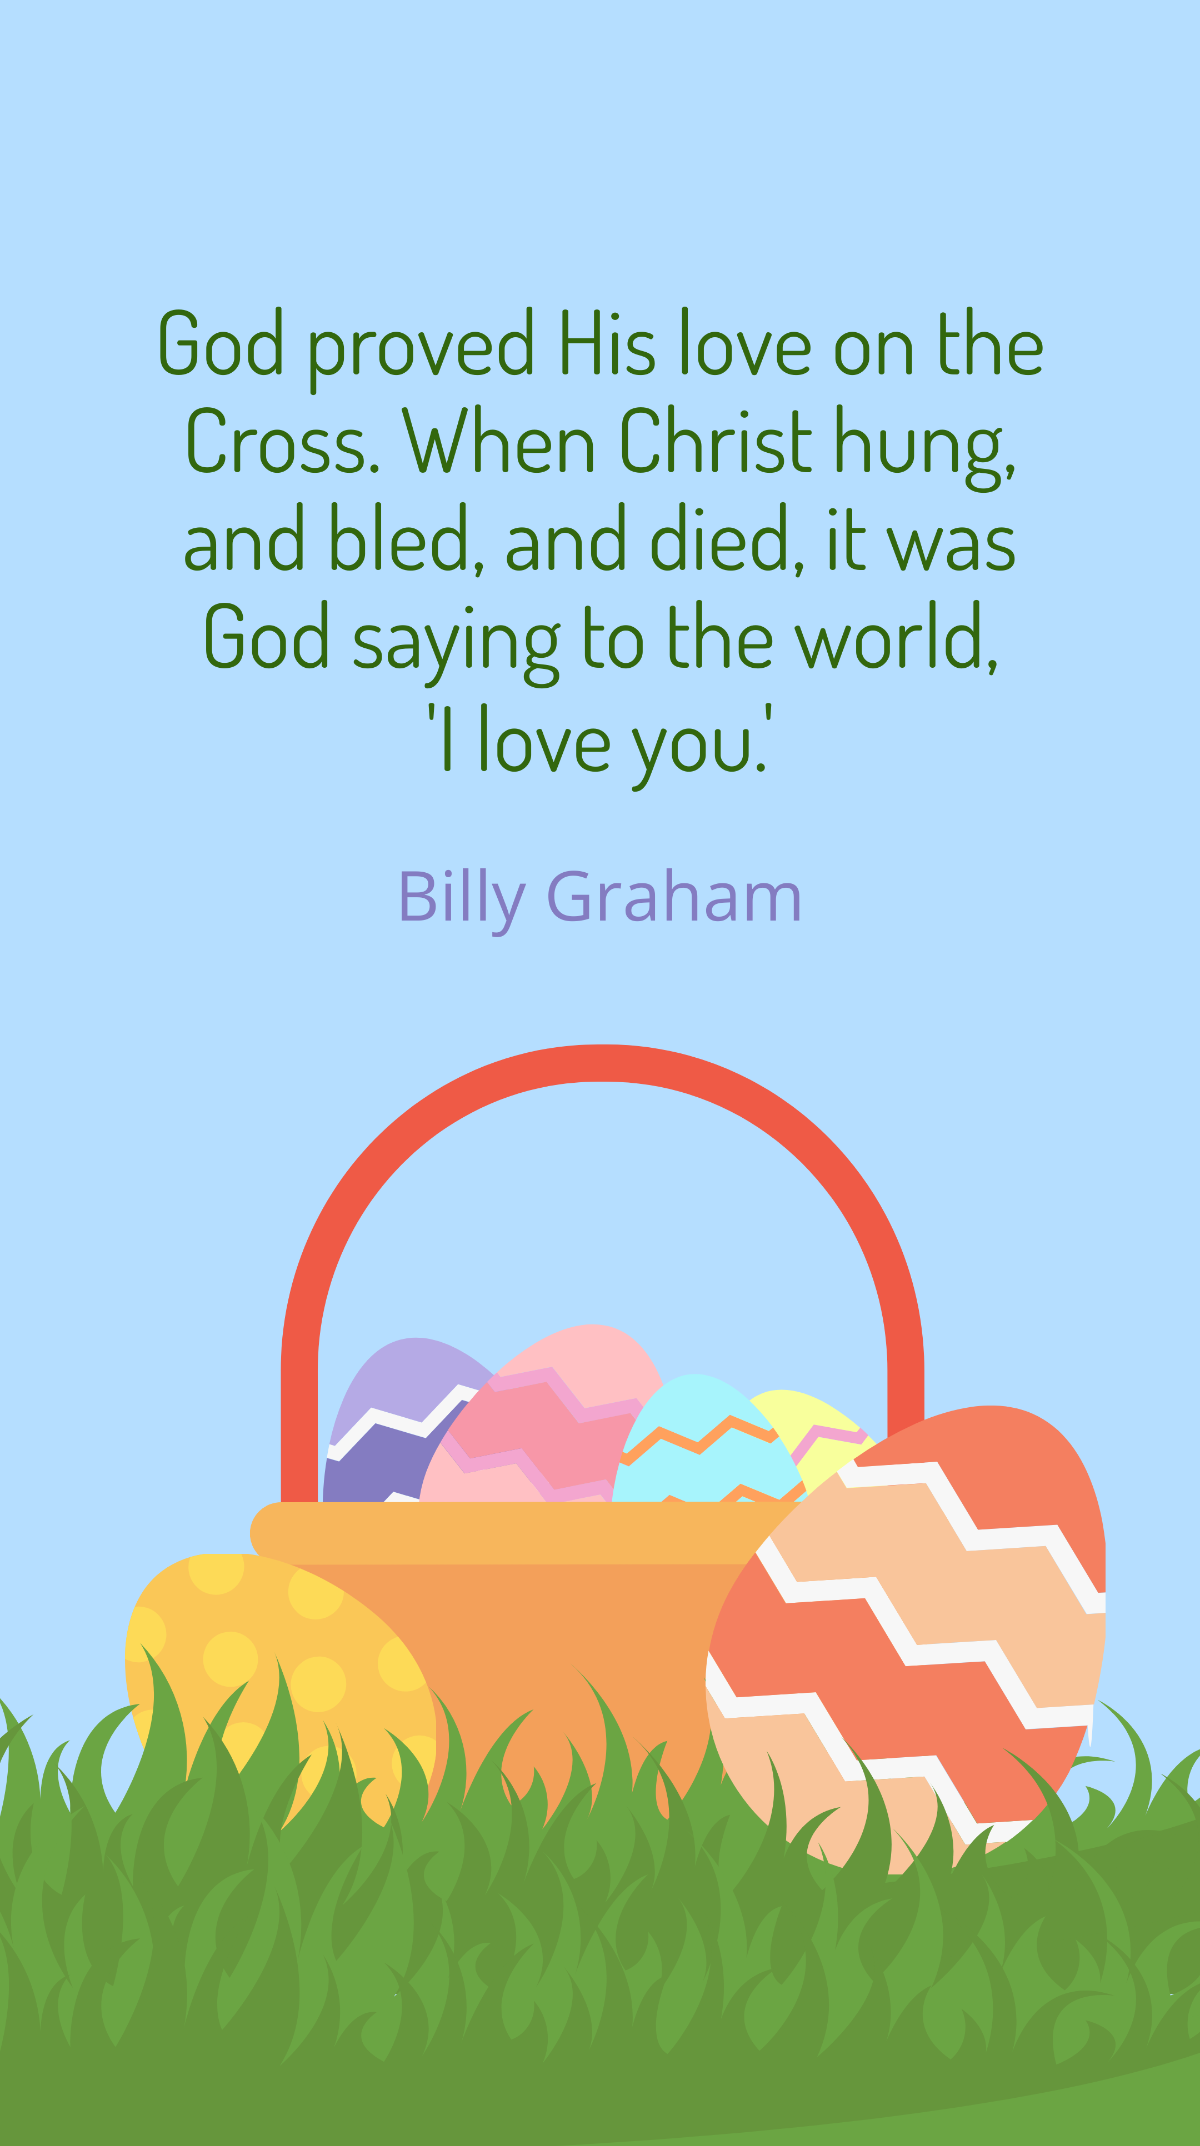 Billy Graham - God proved His love on the Cross. When Christ hung, and bled, and died, it was God saying to the world, 'I love you.' Template